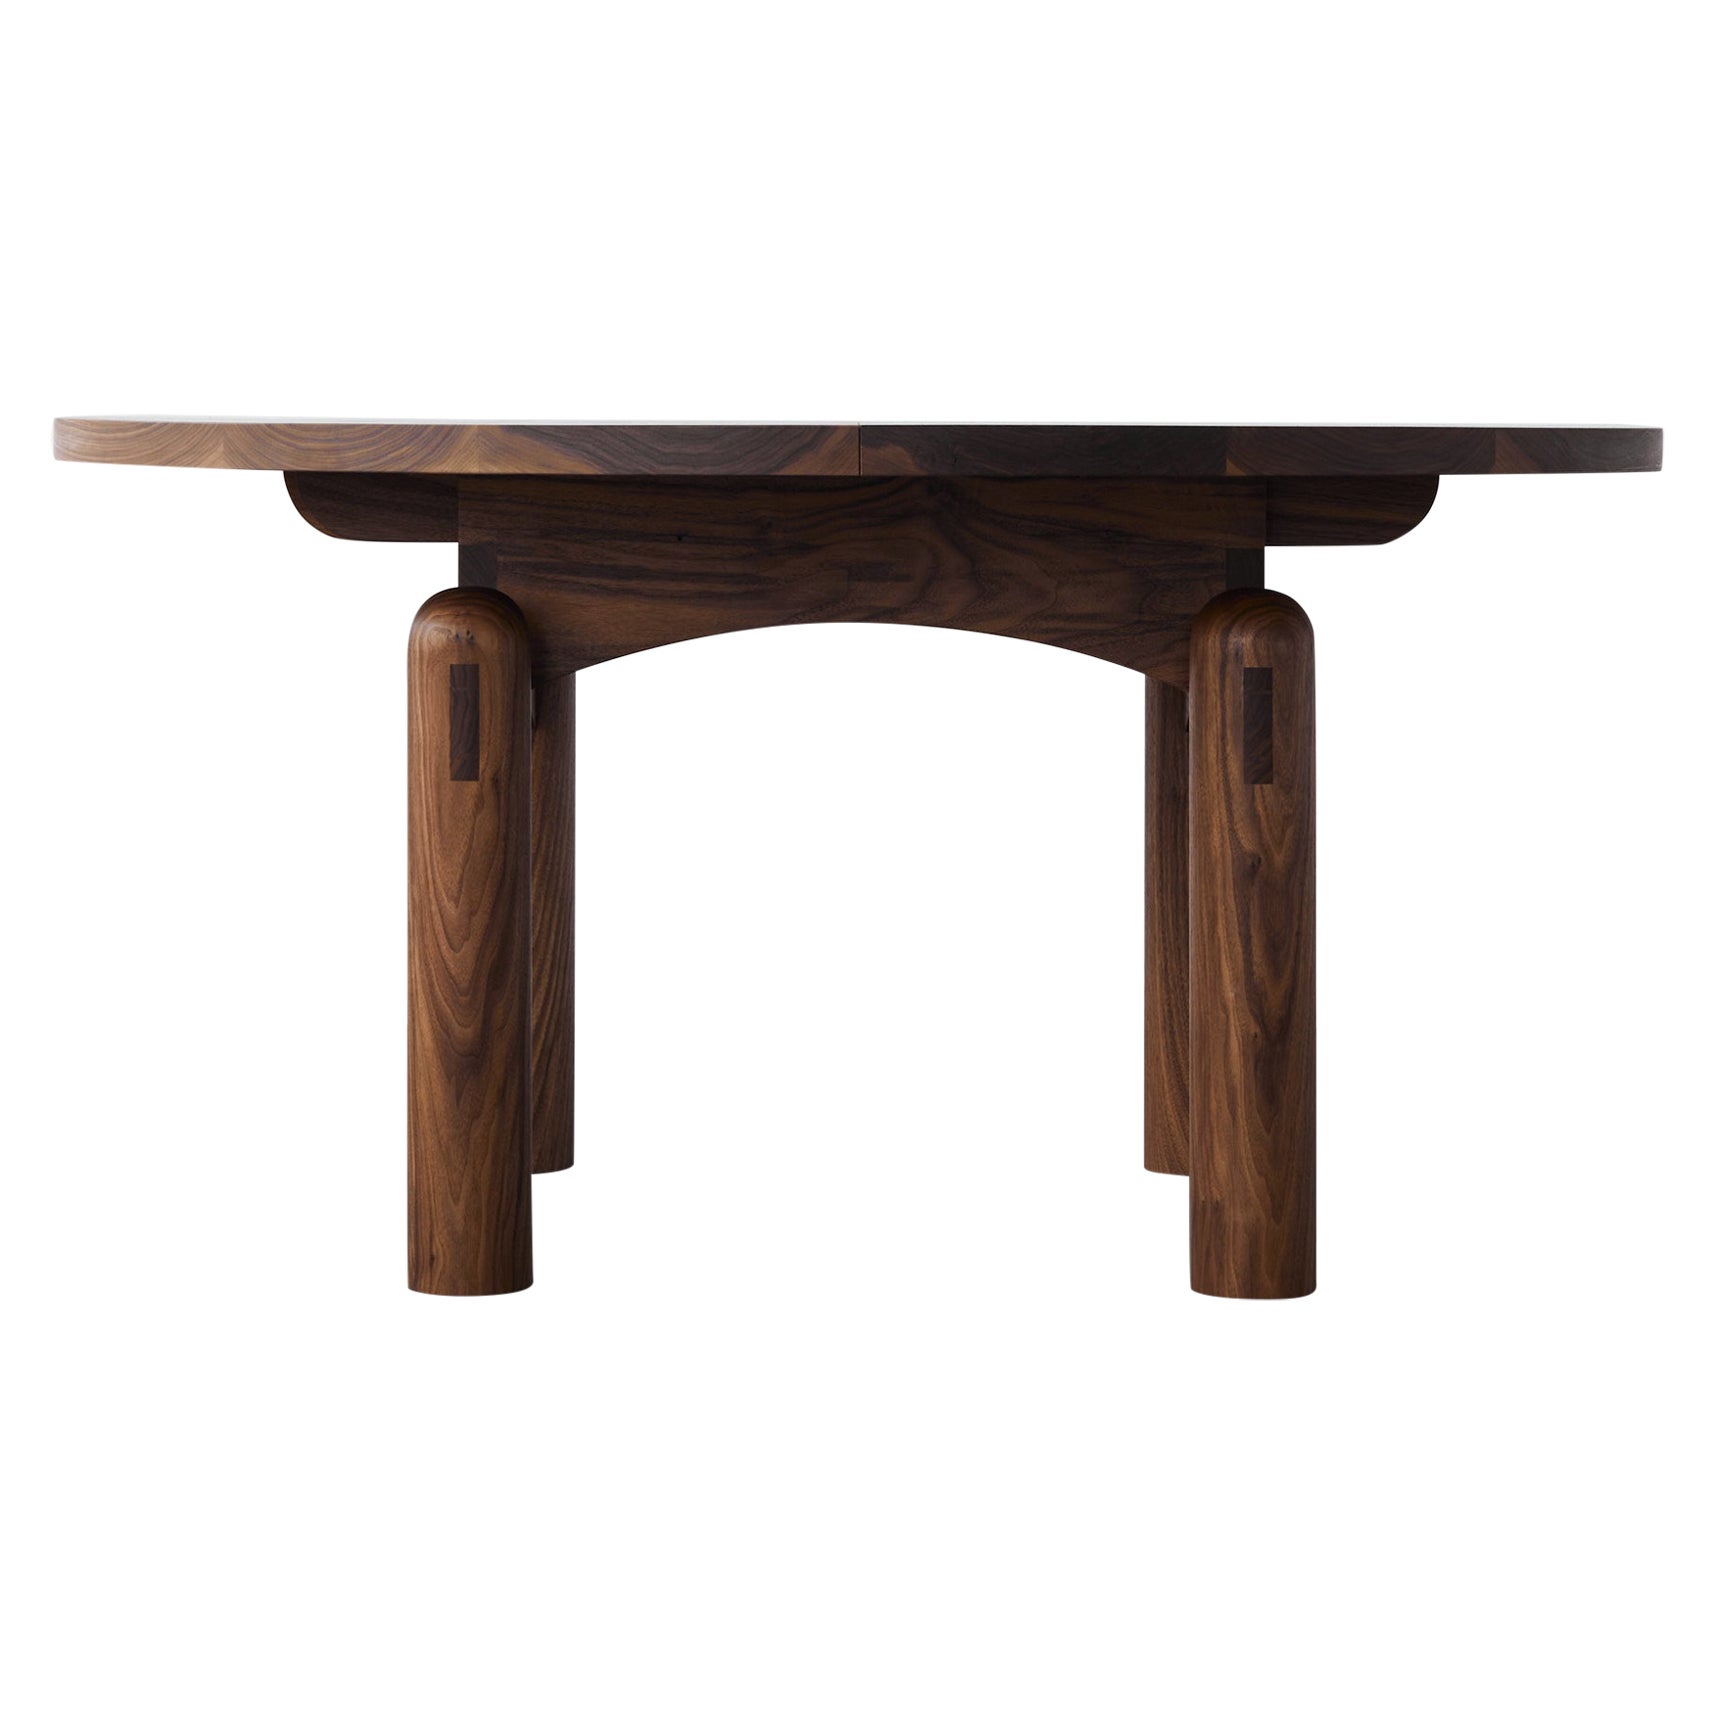 Handmade Nora Dining Table, Extendable Ø150cm  - Walnut - by BACD studio For Sale